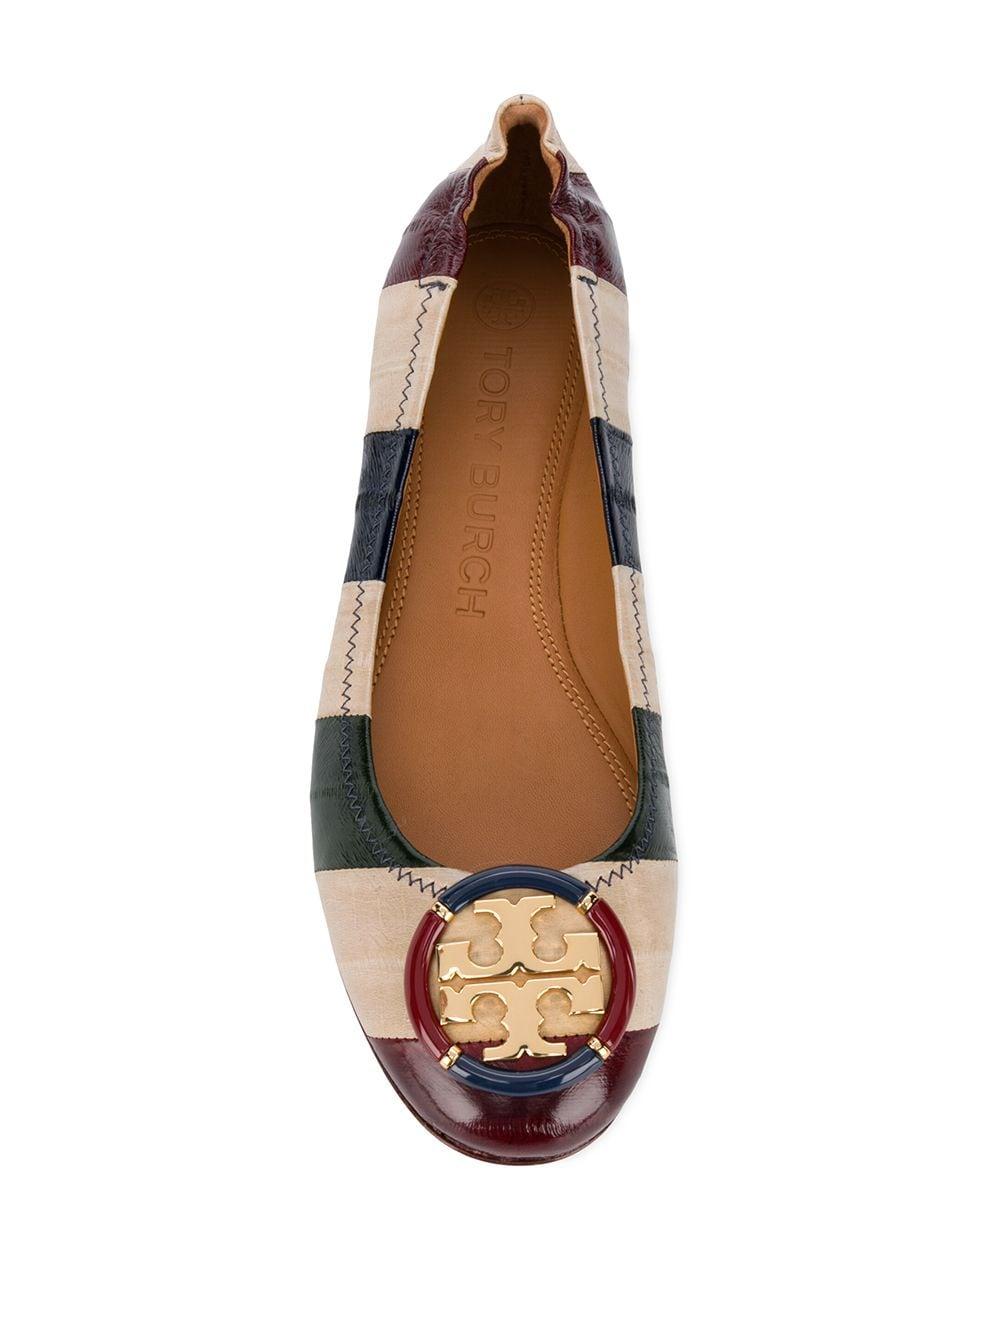 Tory Burch Striped Leather Ballerina Shoes - Save 37% - Lyst